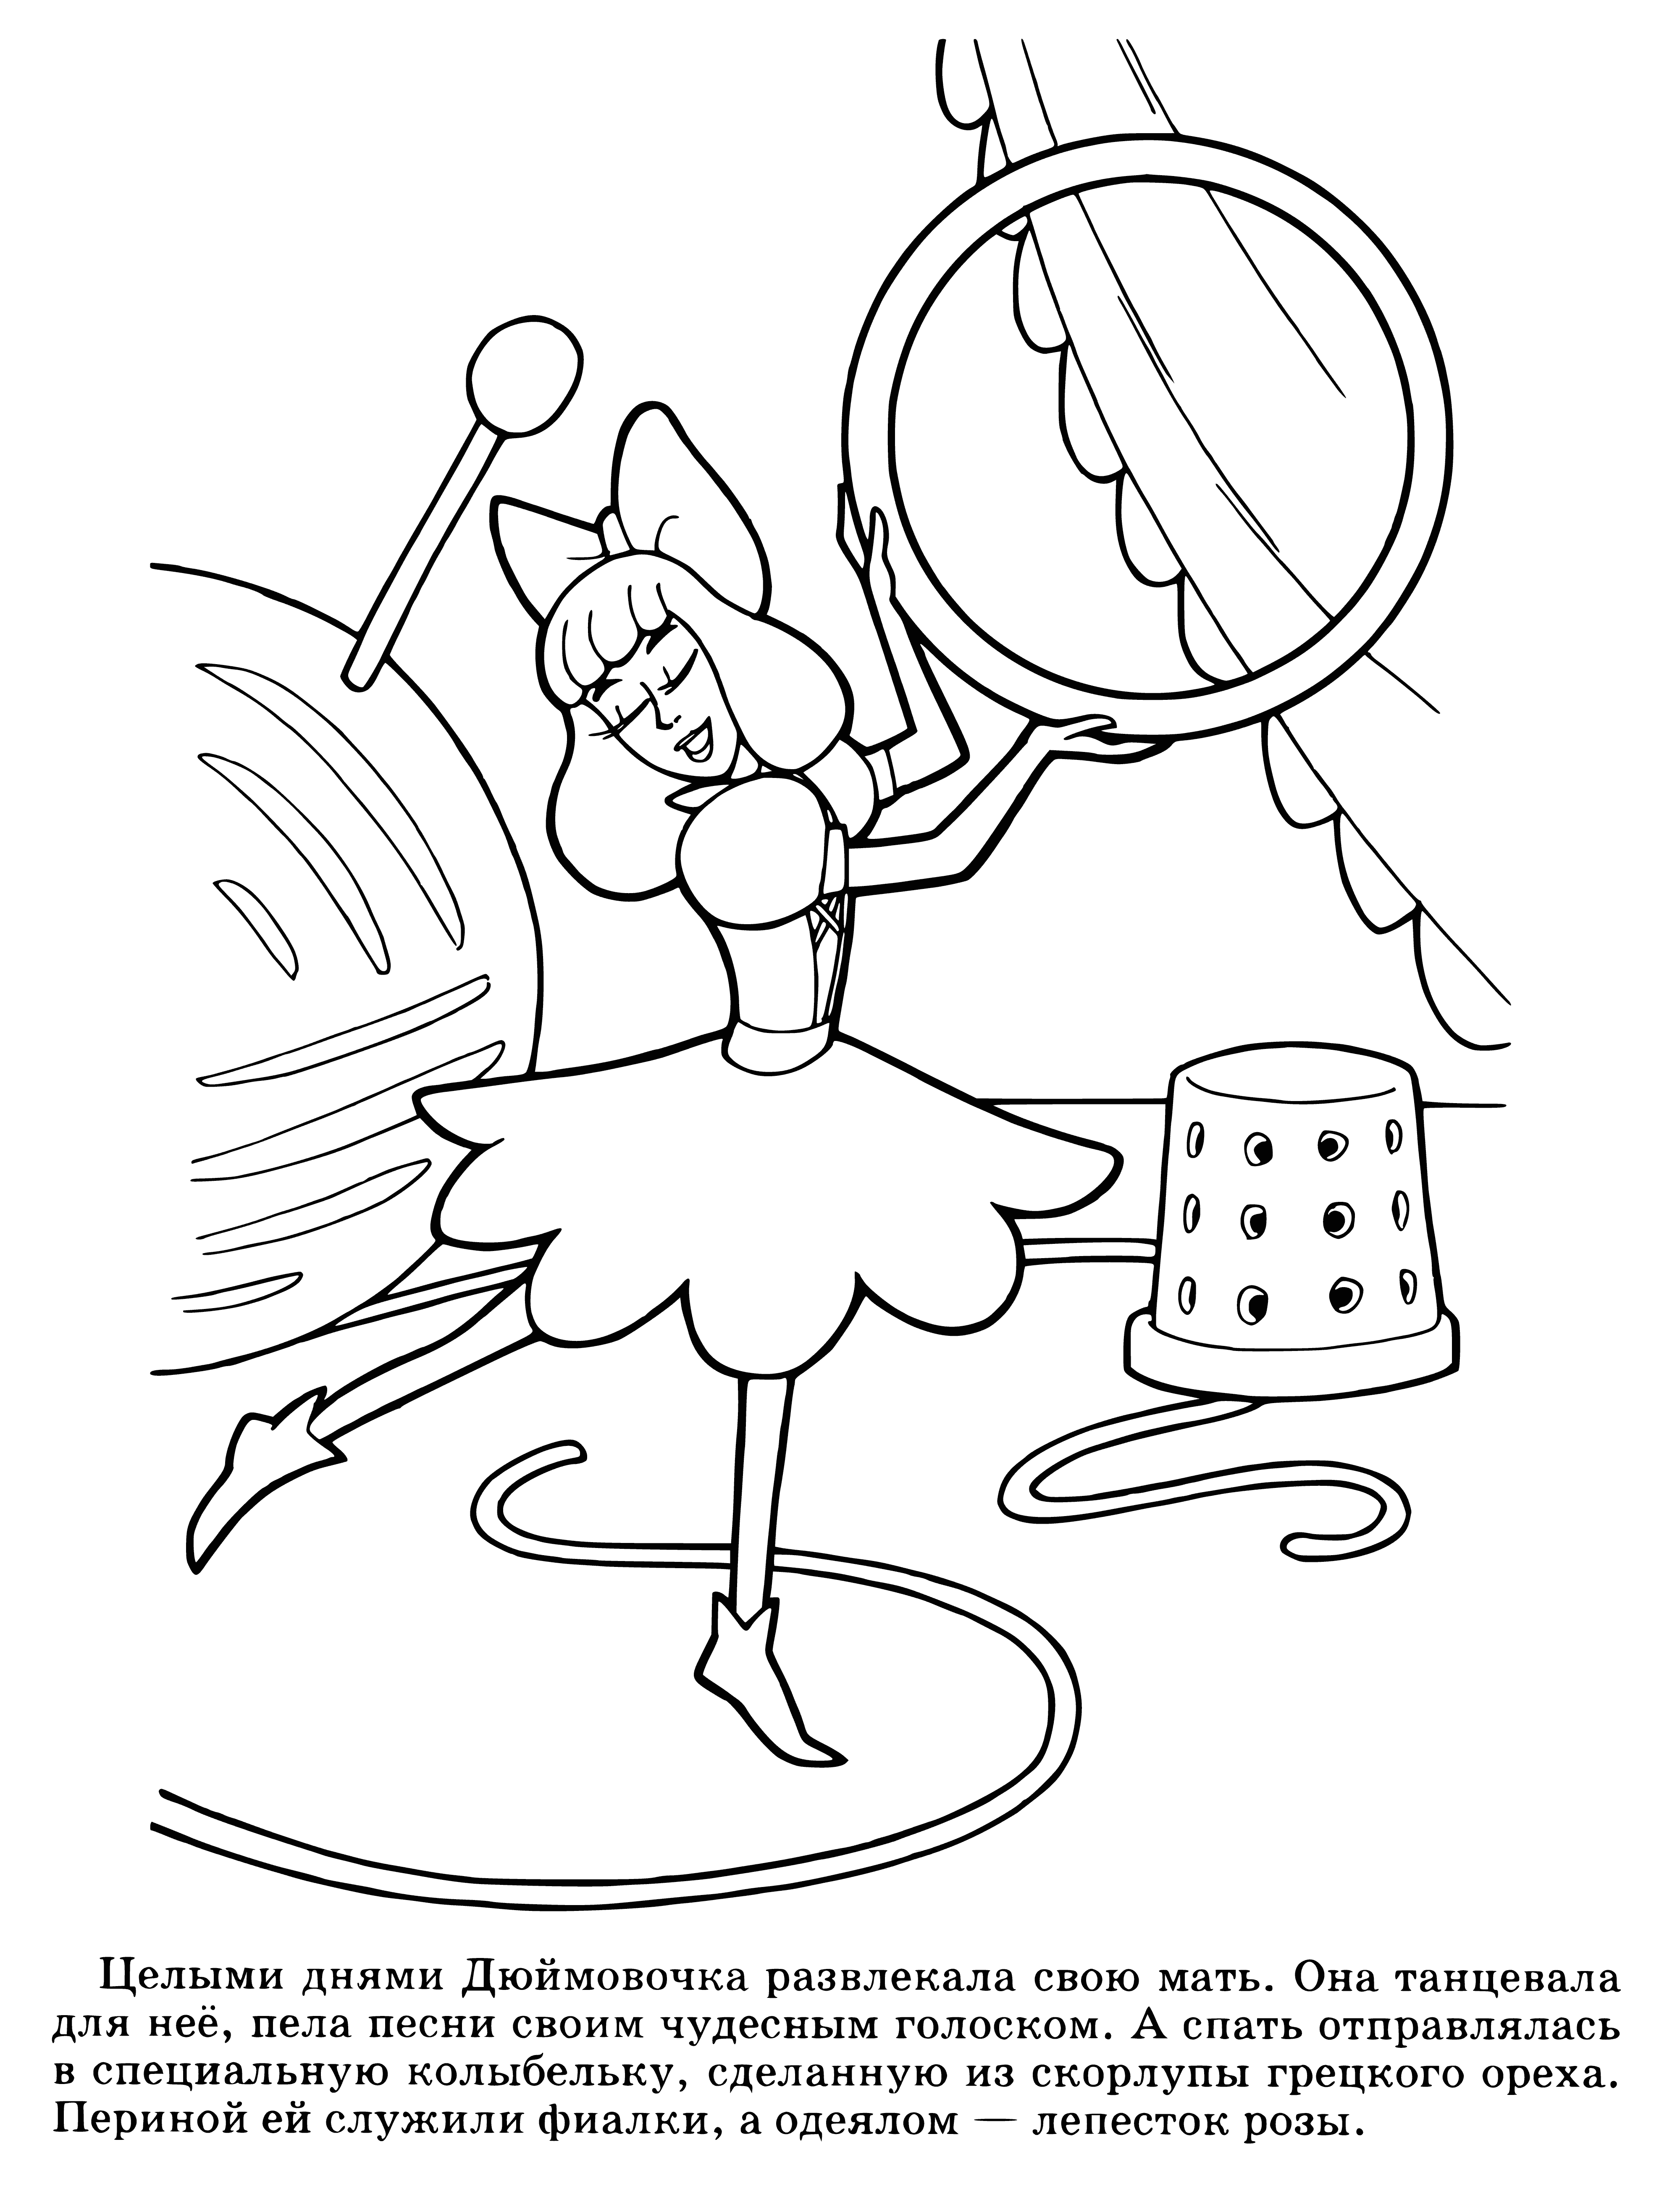 Thumbelina is dancing coloring page